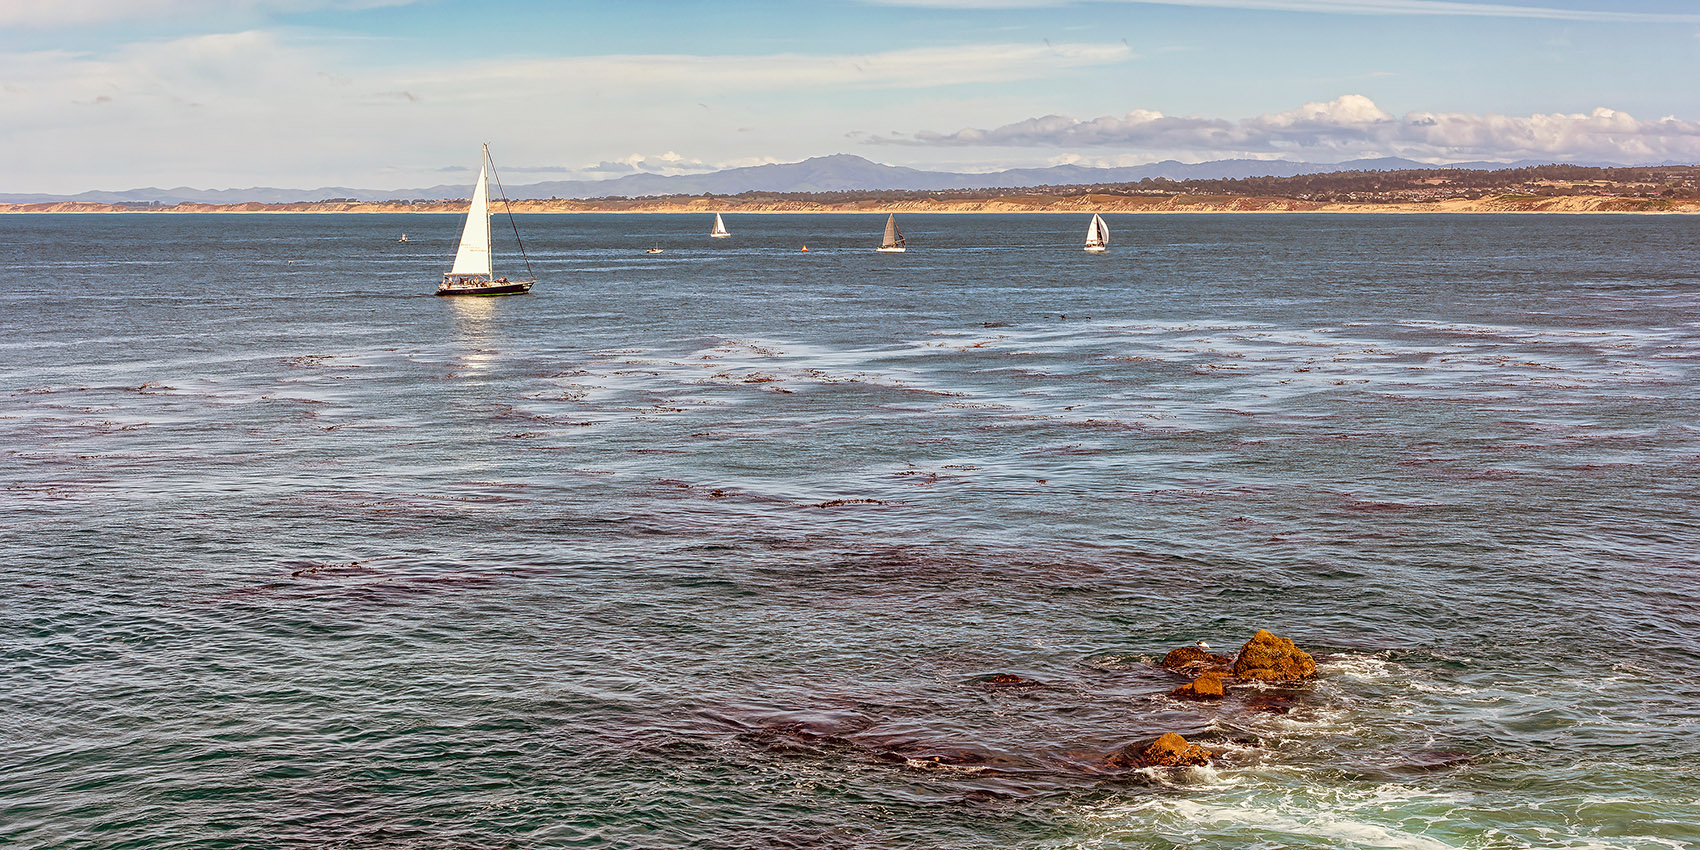 The view from the Monterey Aquarium terrace